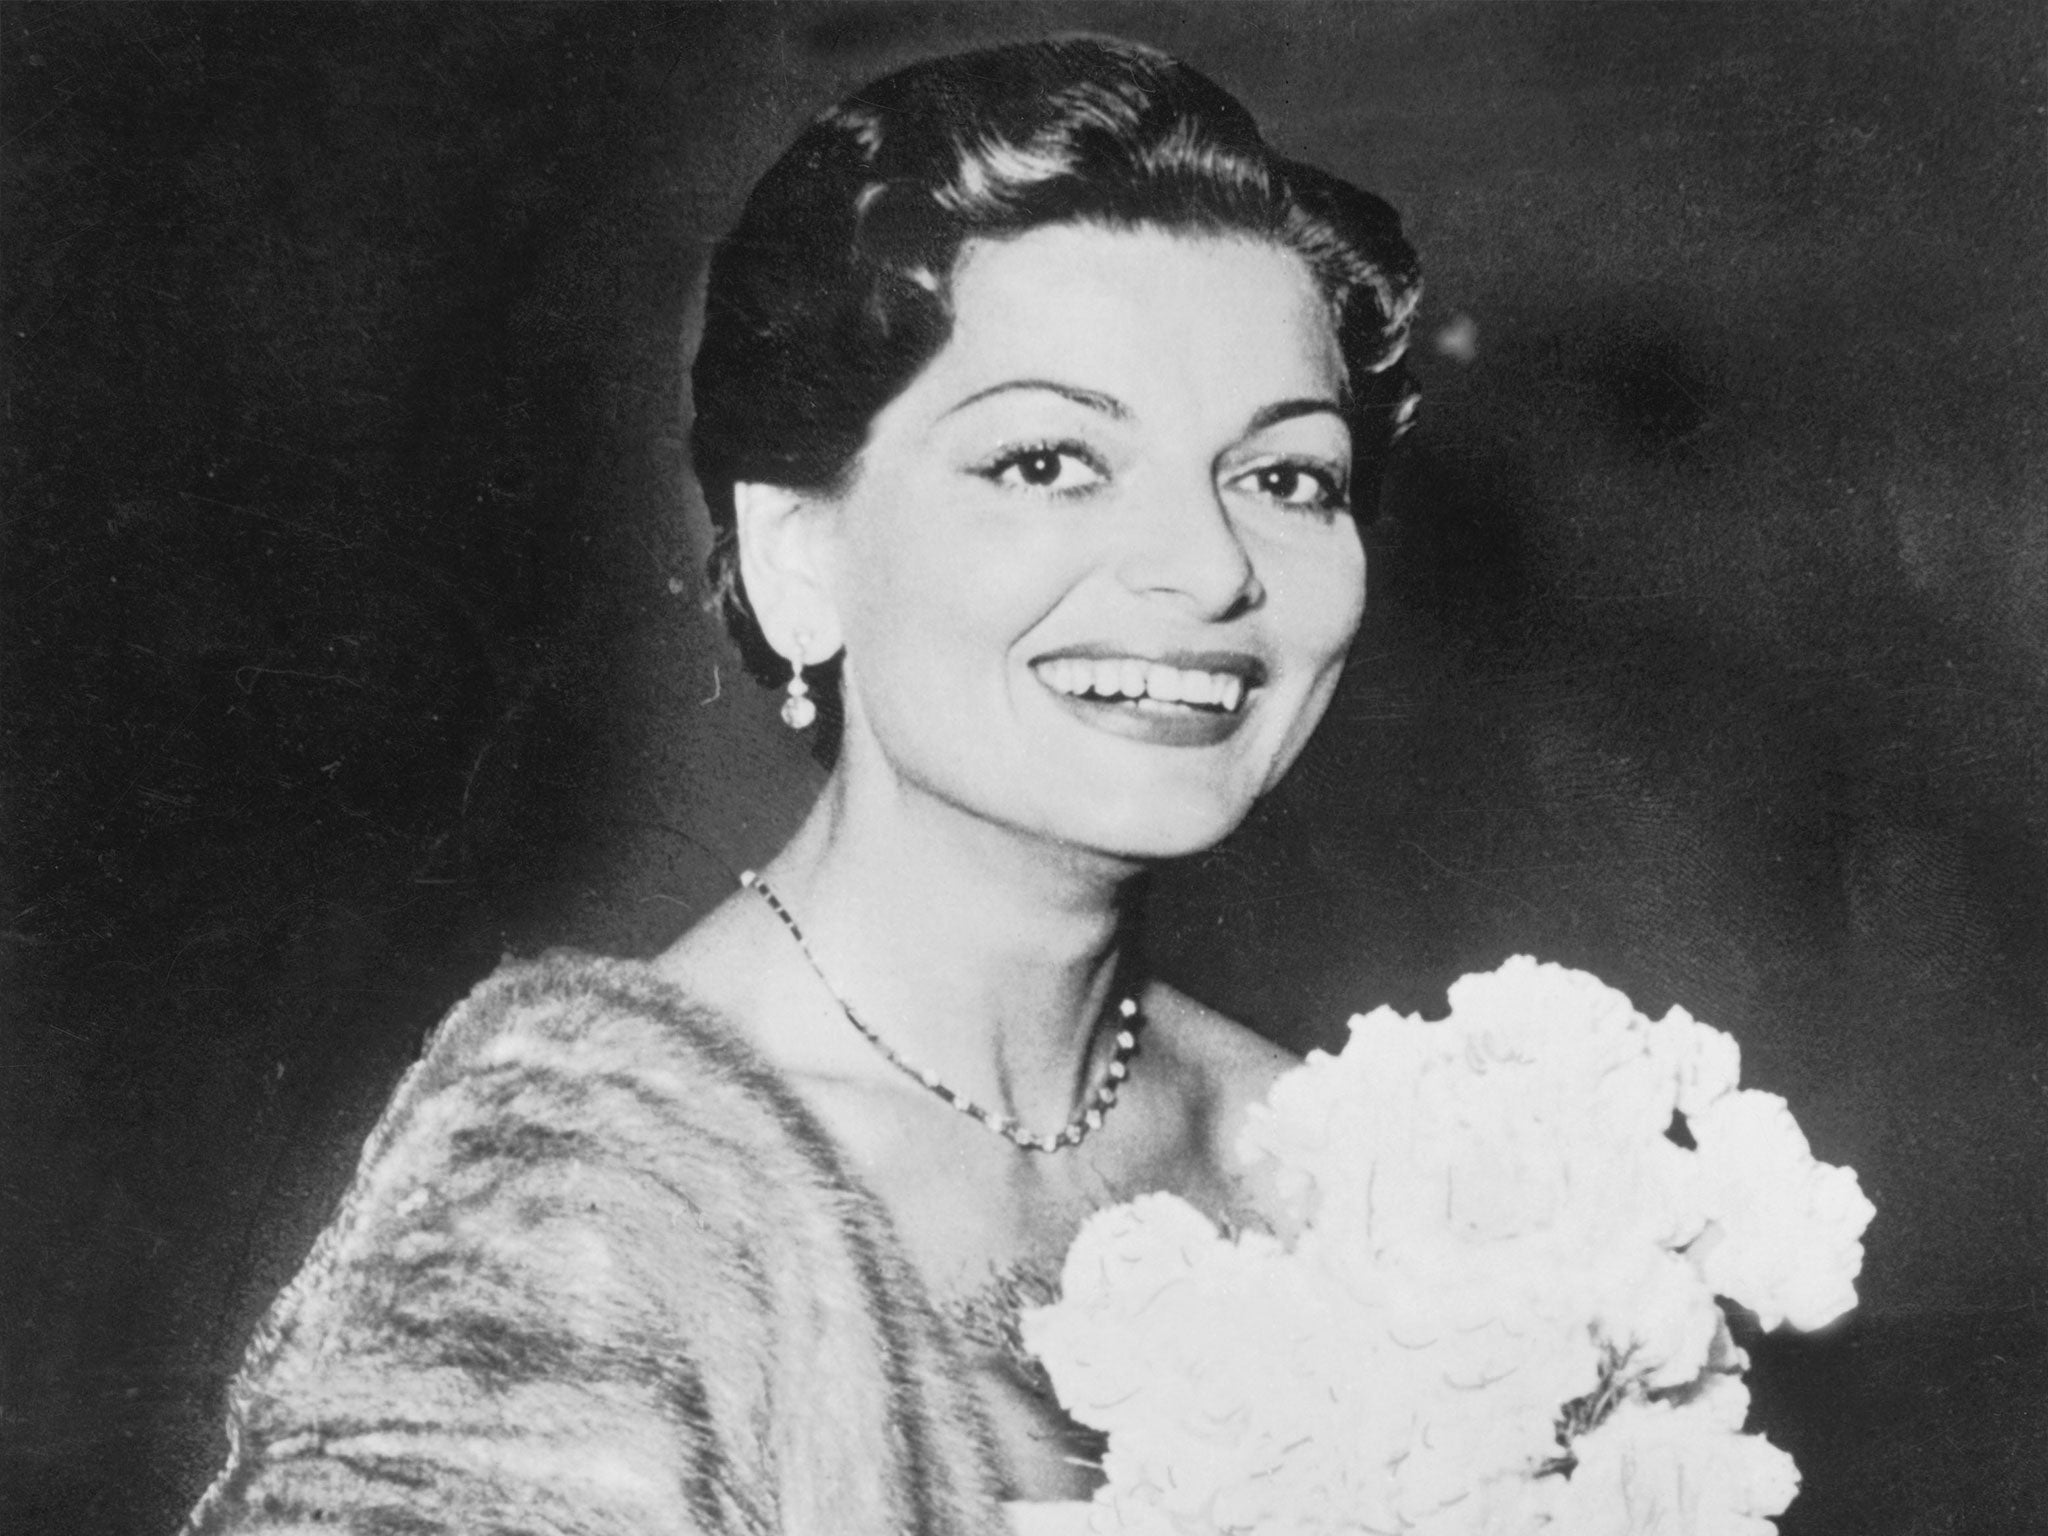 Lys Assia shortly after winning the very first Eurovision Song Contest with her song 'Refrain'